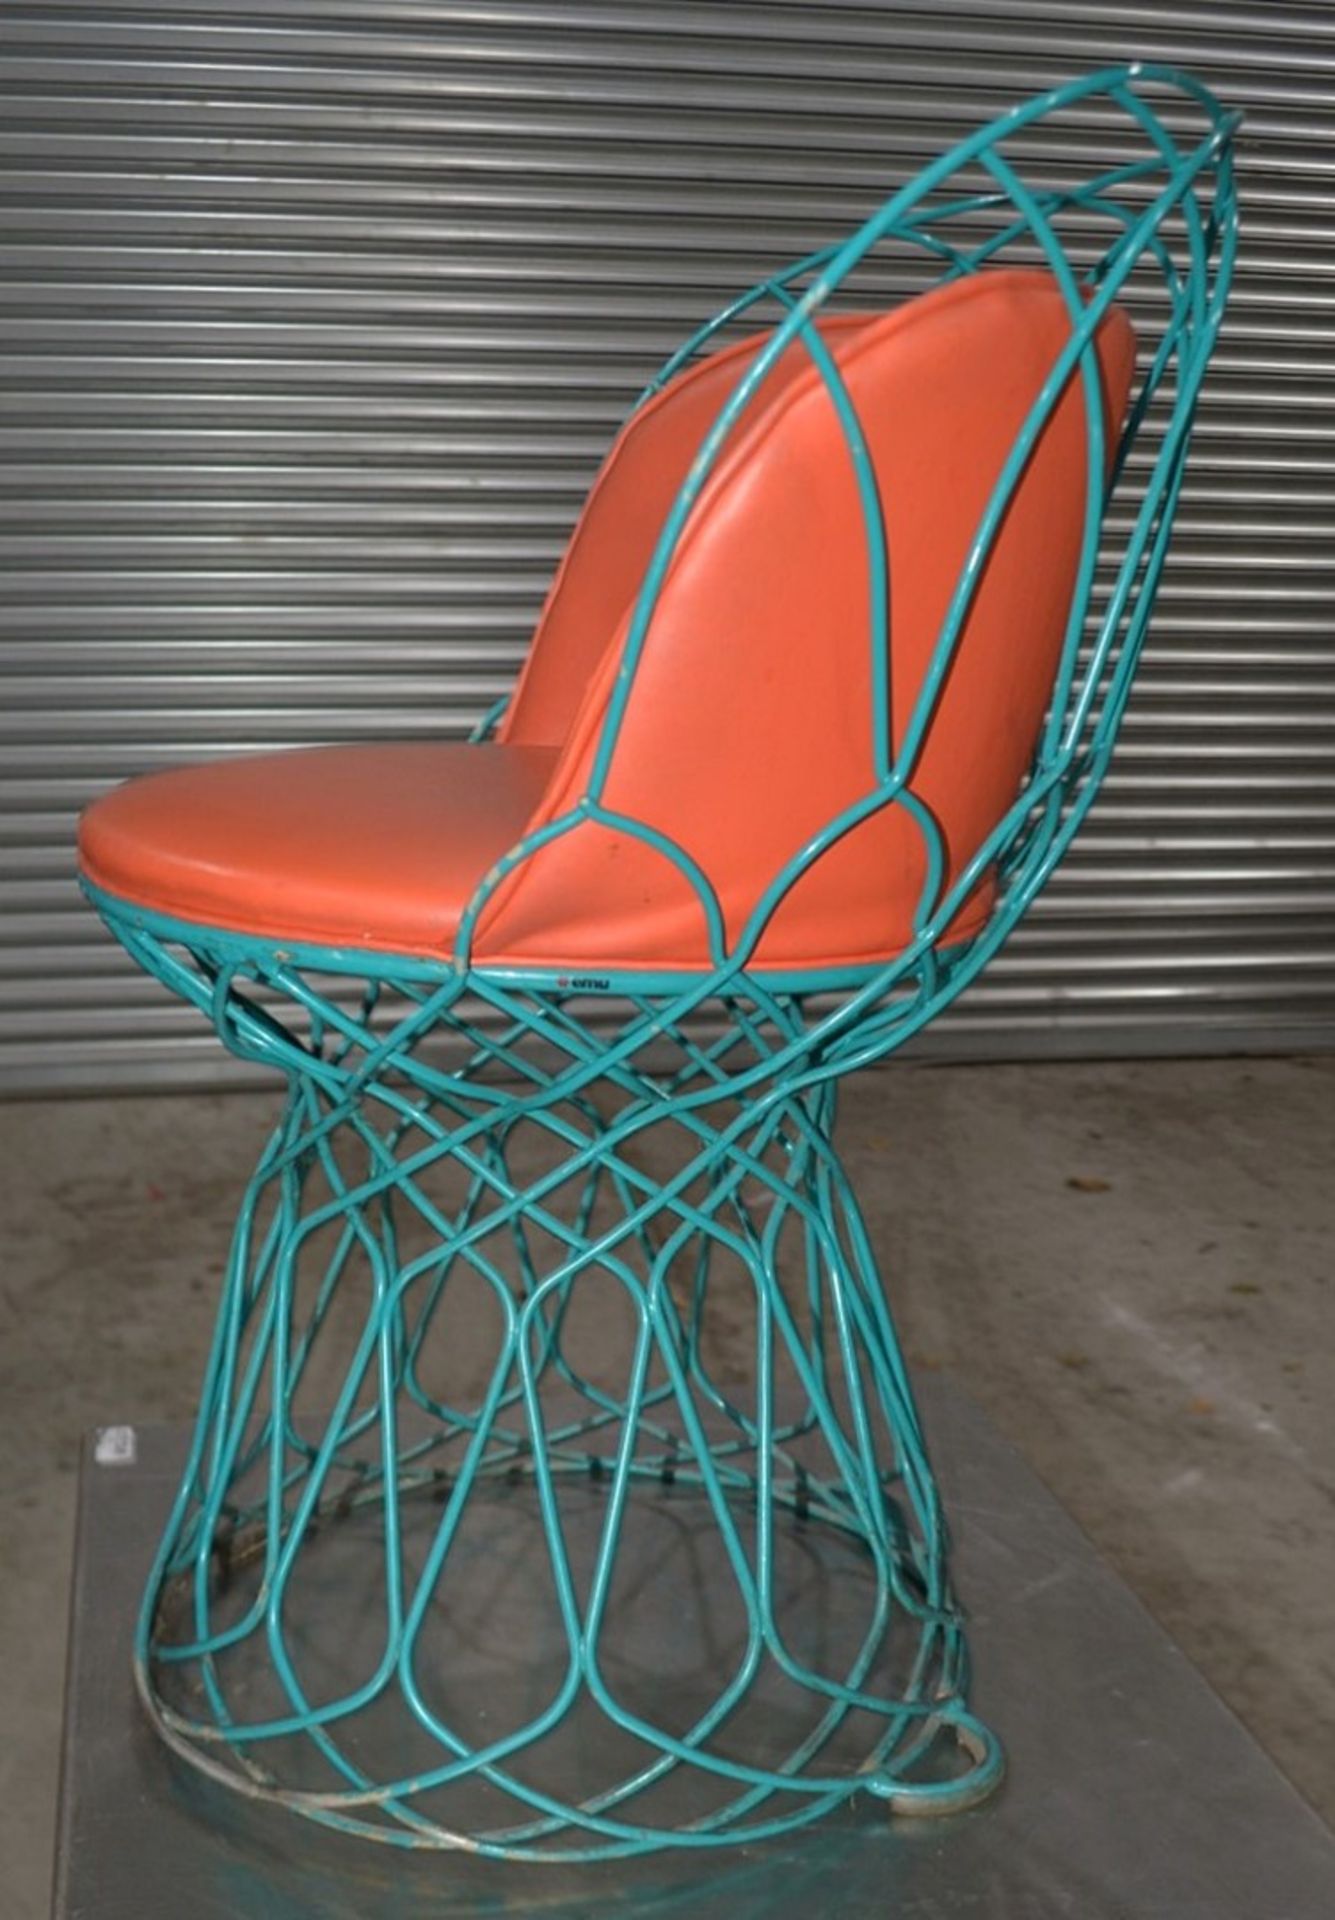 2 x Commercial Outdoor Wire Bistro Chairs With Padded Seats In Orange - Dimensions: H80 x W62 x D45c - Image 3 of 6